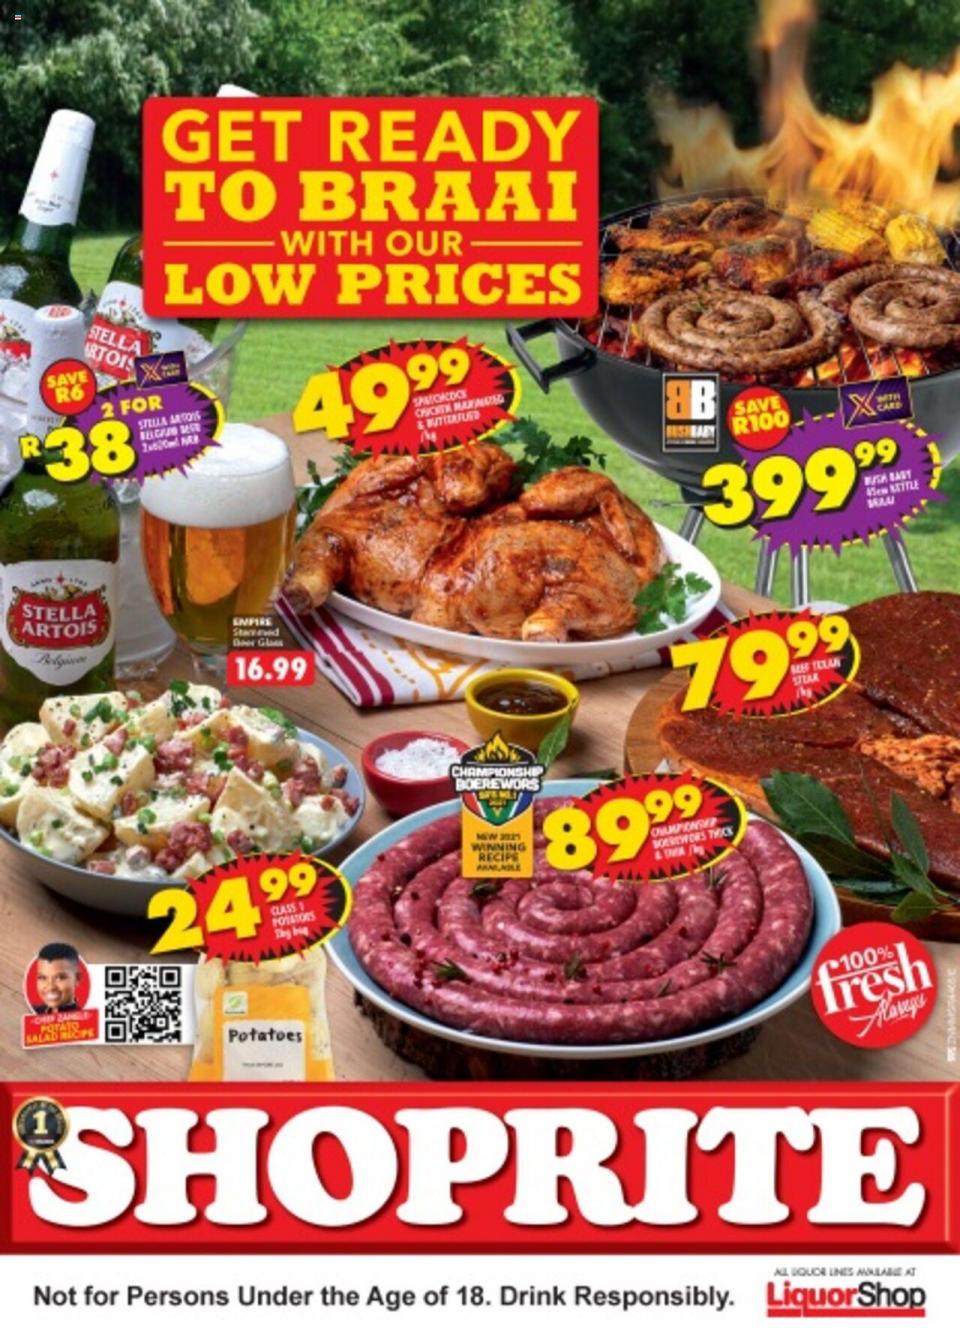 Shoprite Specials Braai With Low Prices 20 Sep – 3 Oct 2021